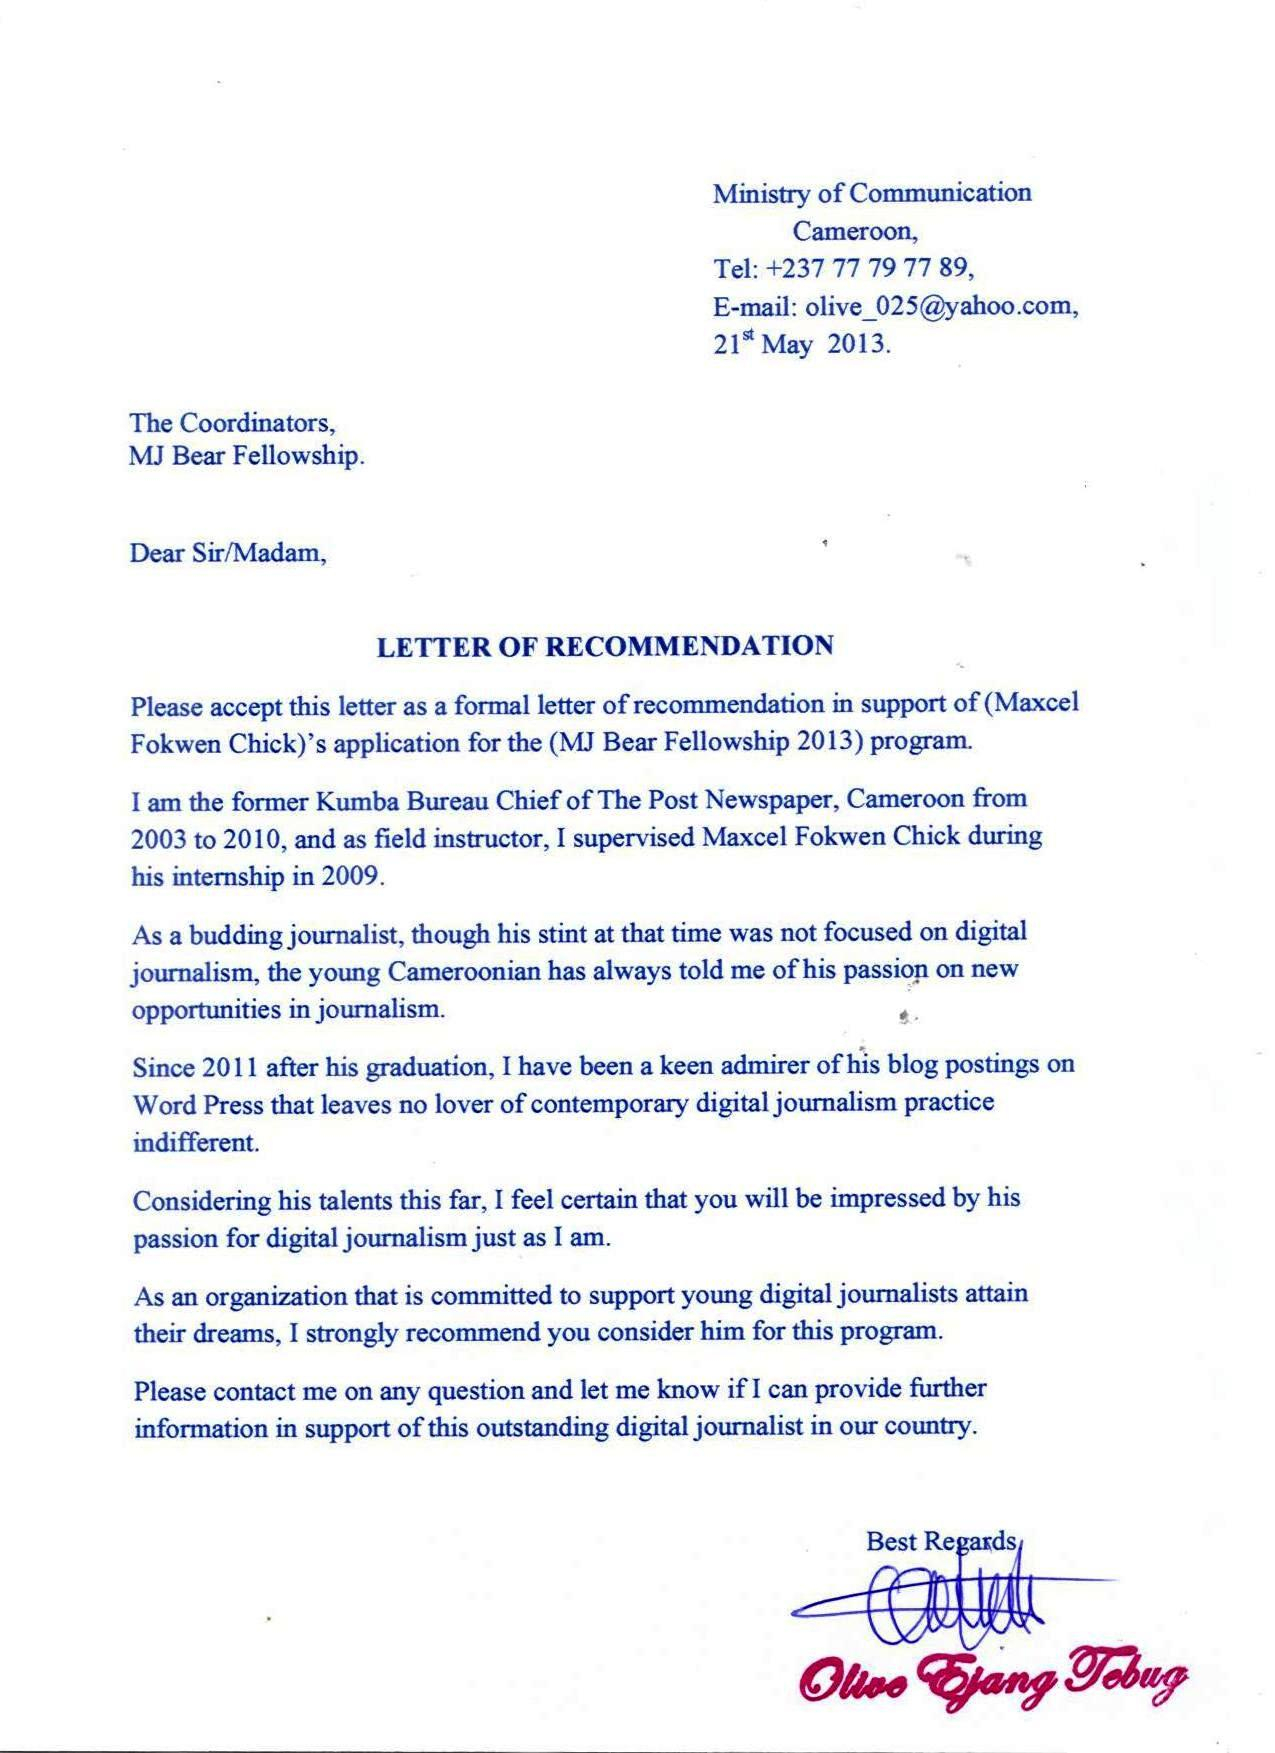 Recommendation Letter For Grant Application Sample Akali with regard to dimensions 1275 X 1753